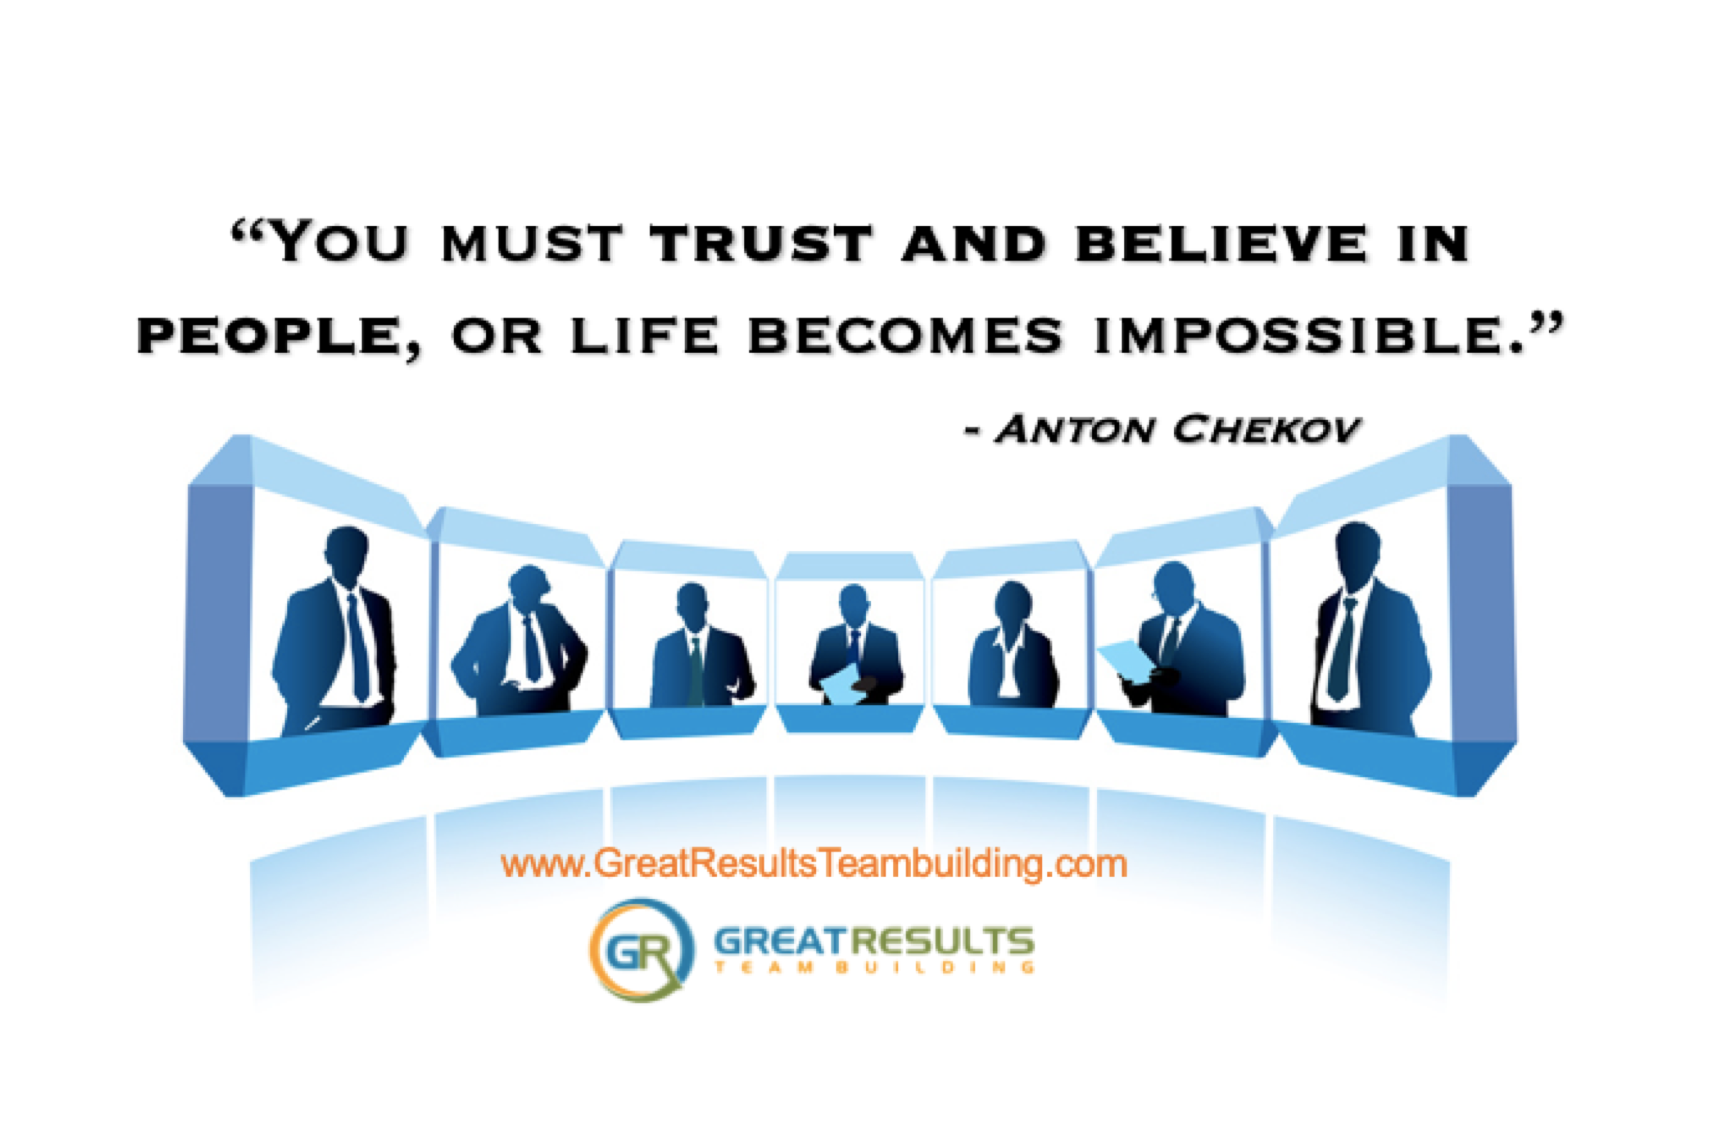 you must trust and believe in people, or life becomes impossible. anton chekov